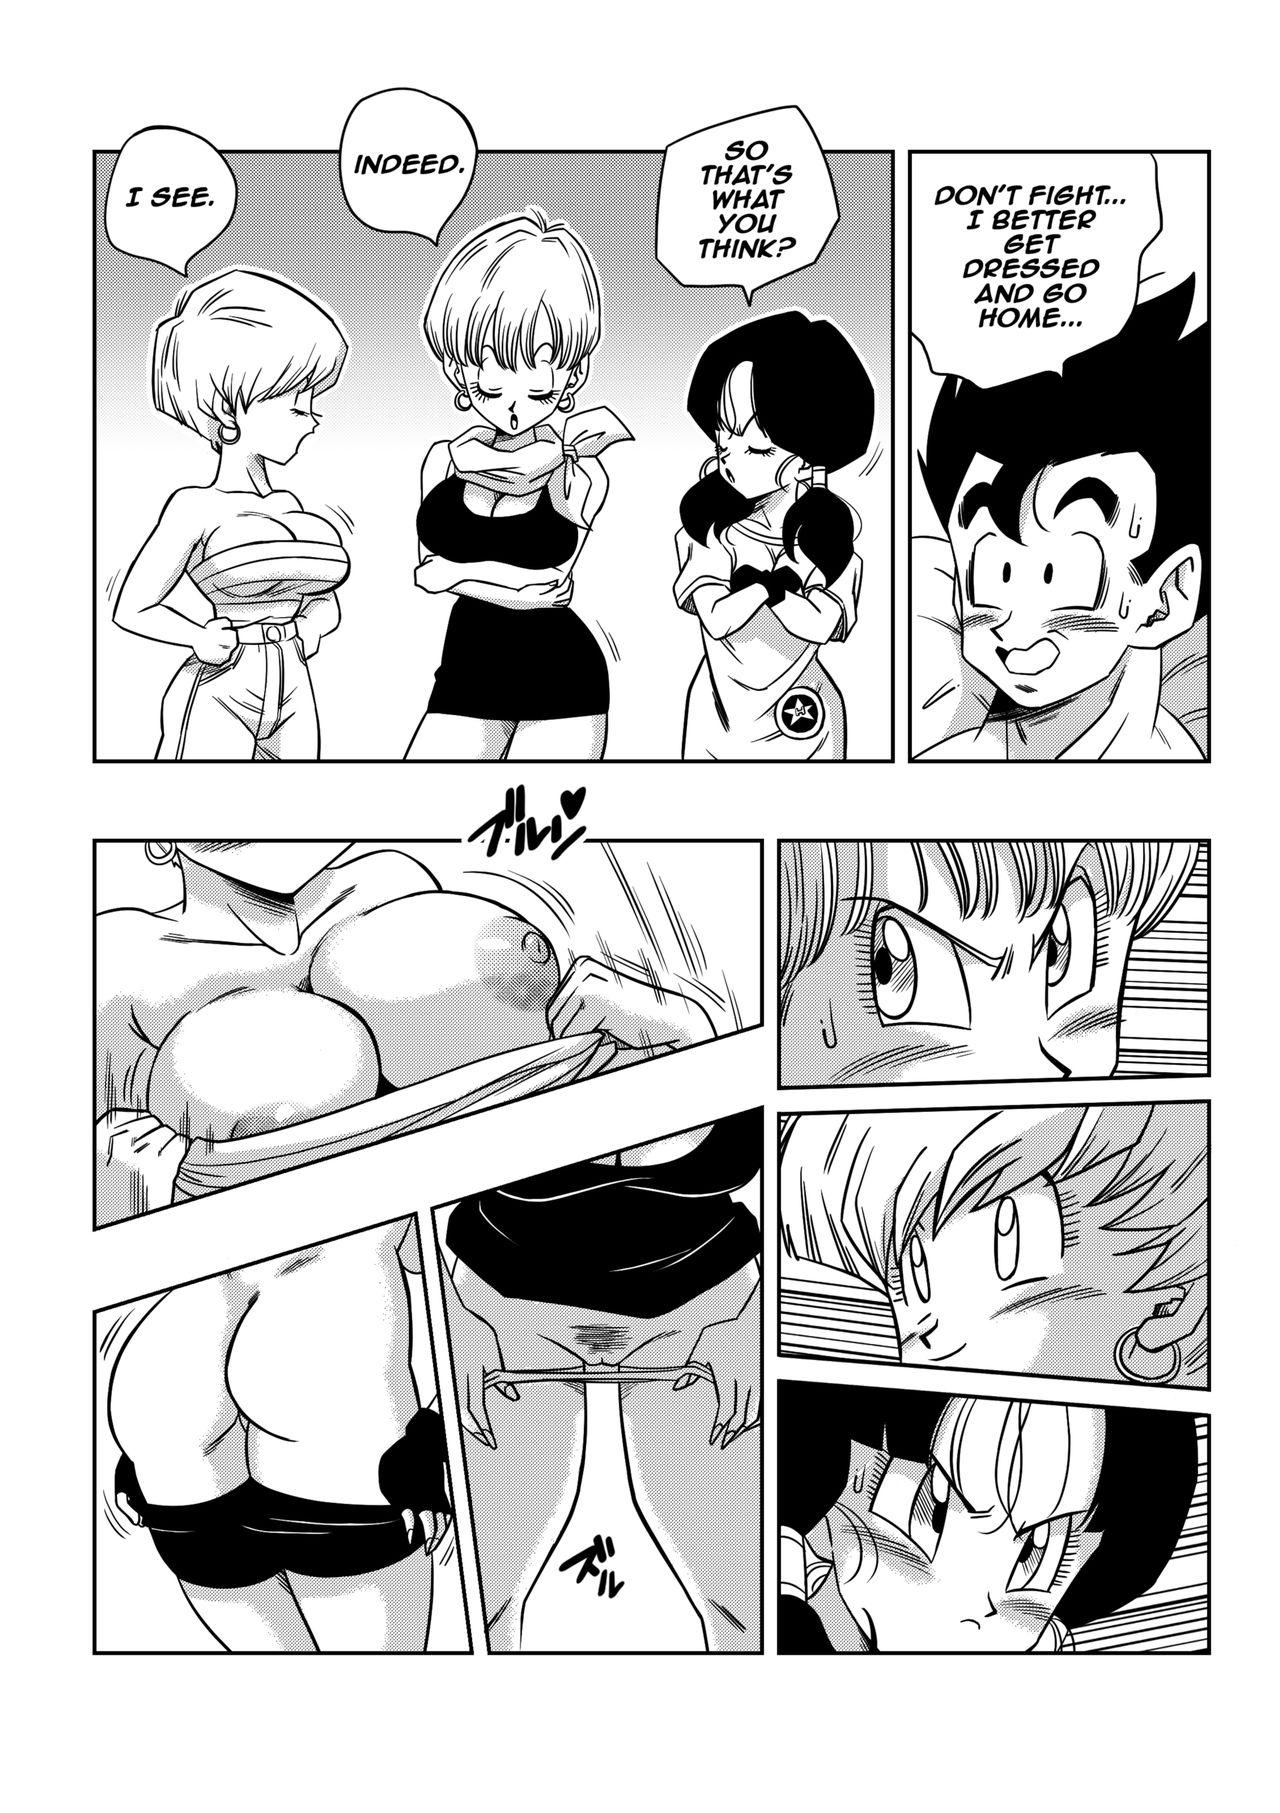 Students LOVE TRIANGLE Z - Part 4 - Dragon ball z Couple - Page 10